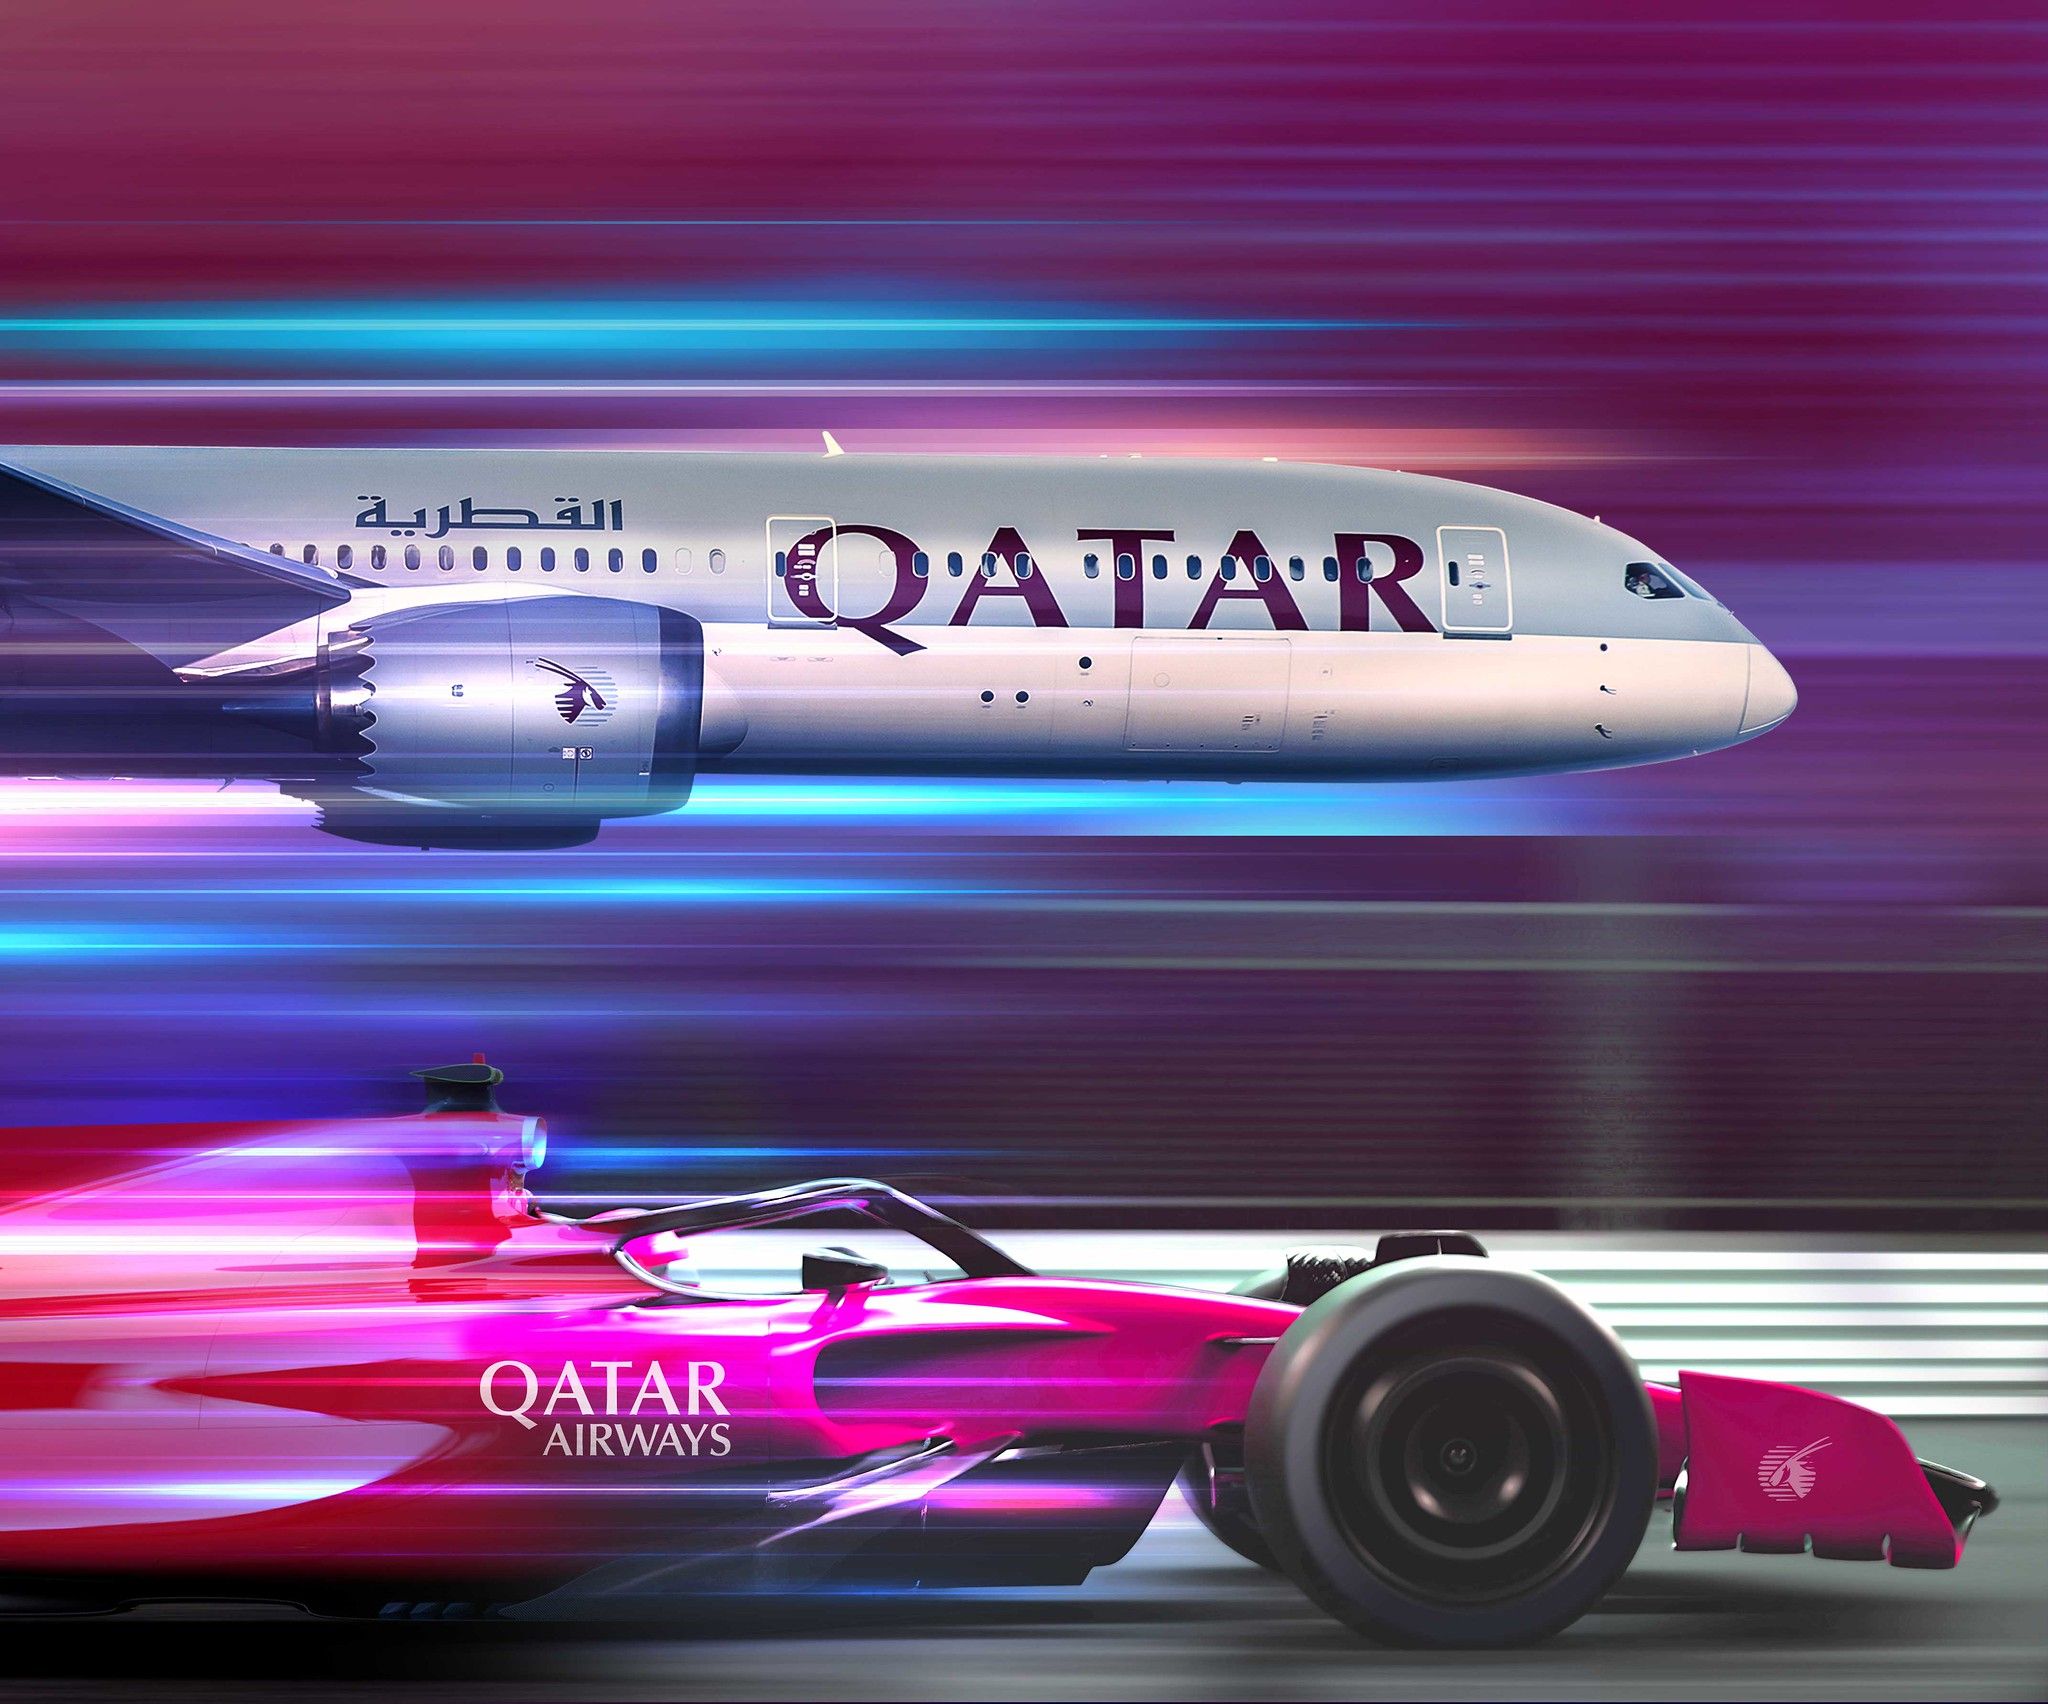 Qatar Airways Revs Up Excitement for Motorsports in 2023 With Live Formula 1 Car Demonstration at Lusail Boulevard